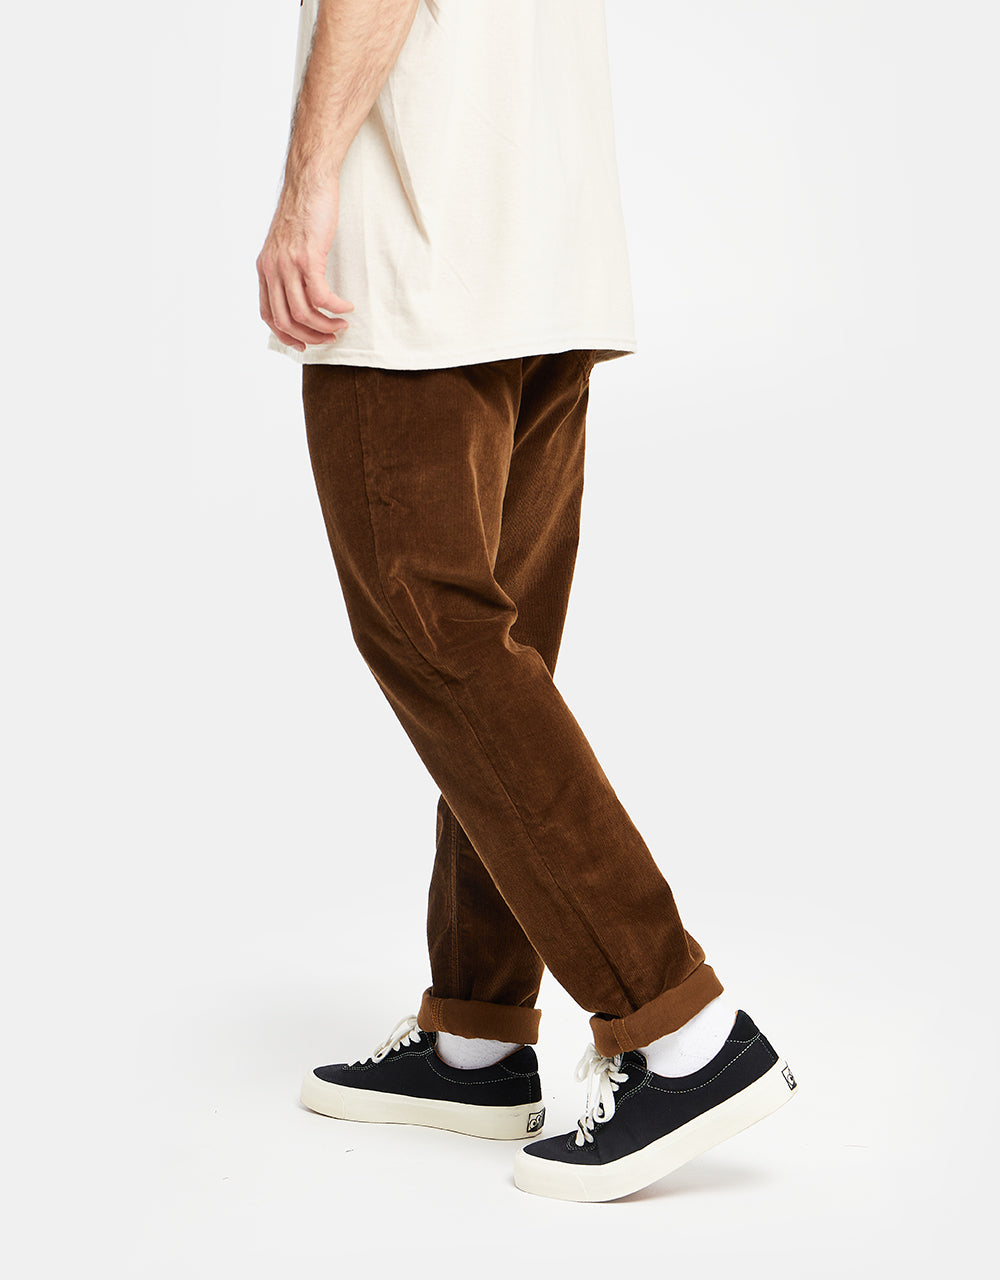 Route One Slim Fit Cords - Chocolate